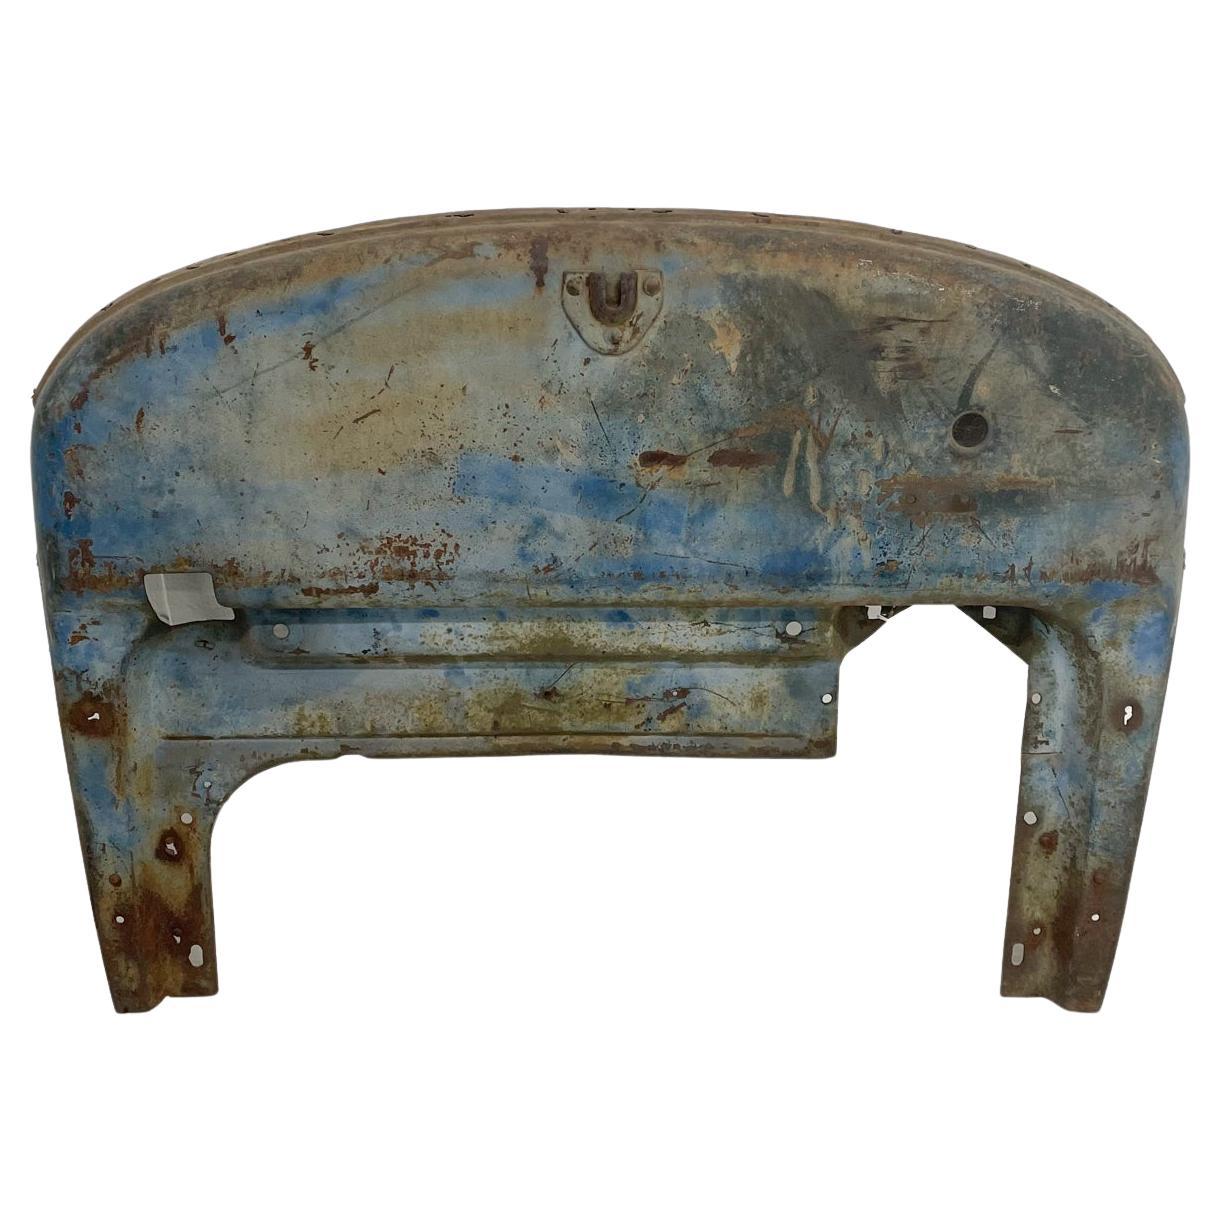 Salvaged Art Industrial Blue Beauty Oxidized Metal Piece Tarnished Distress